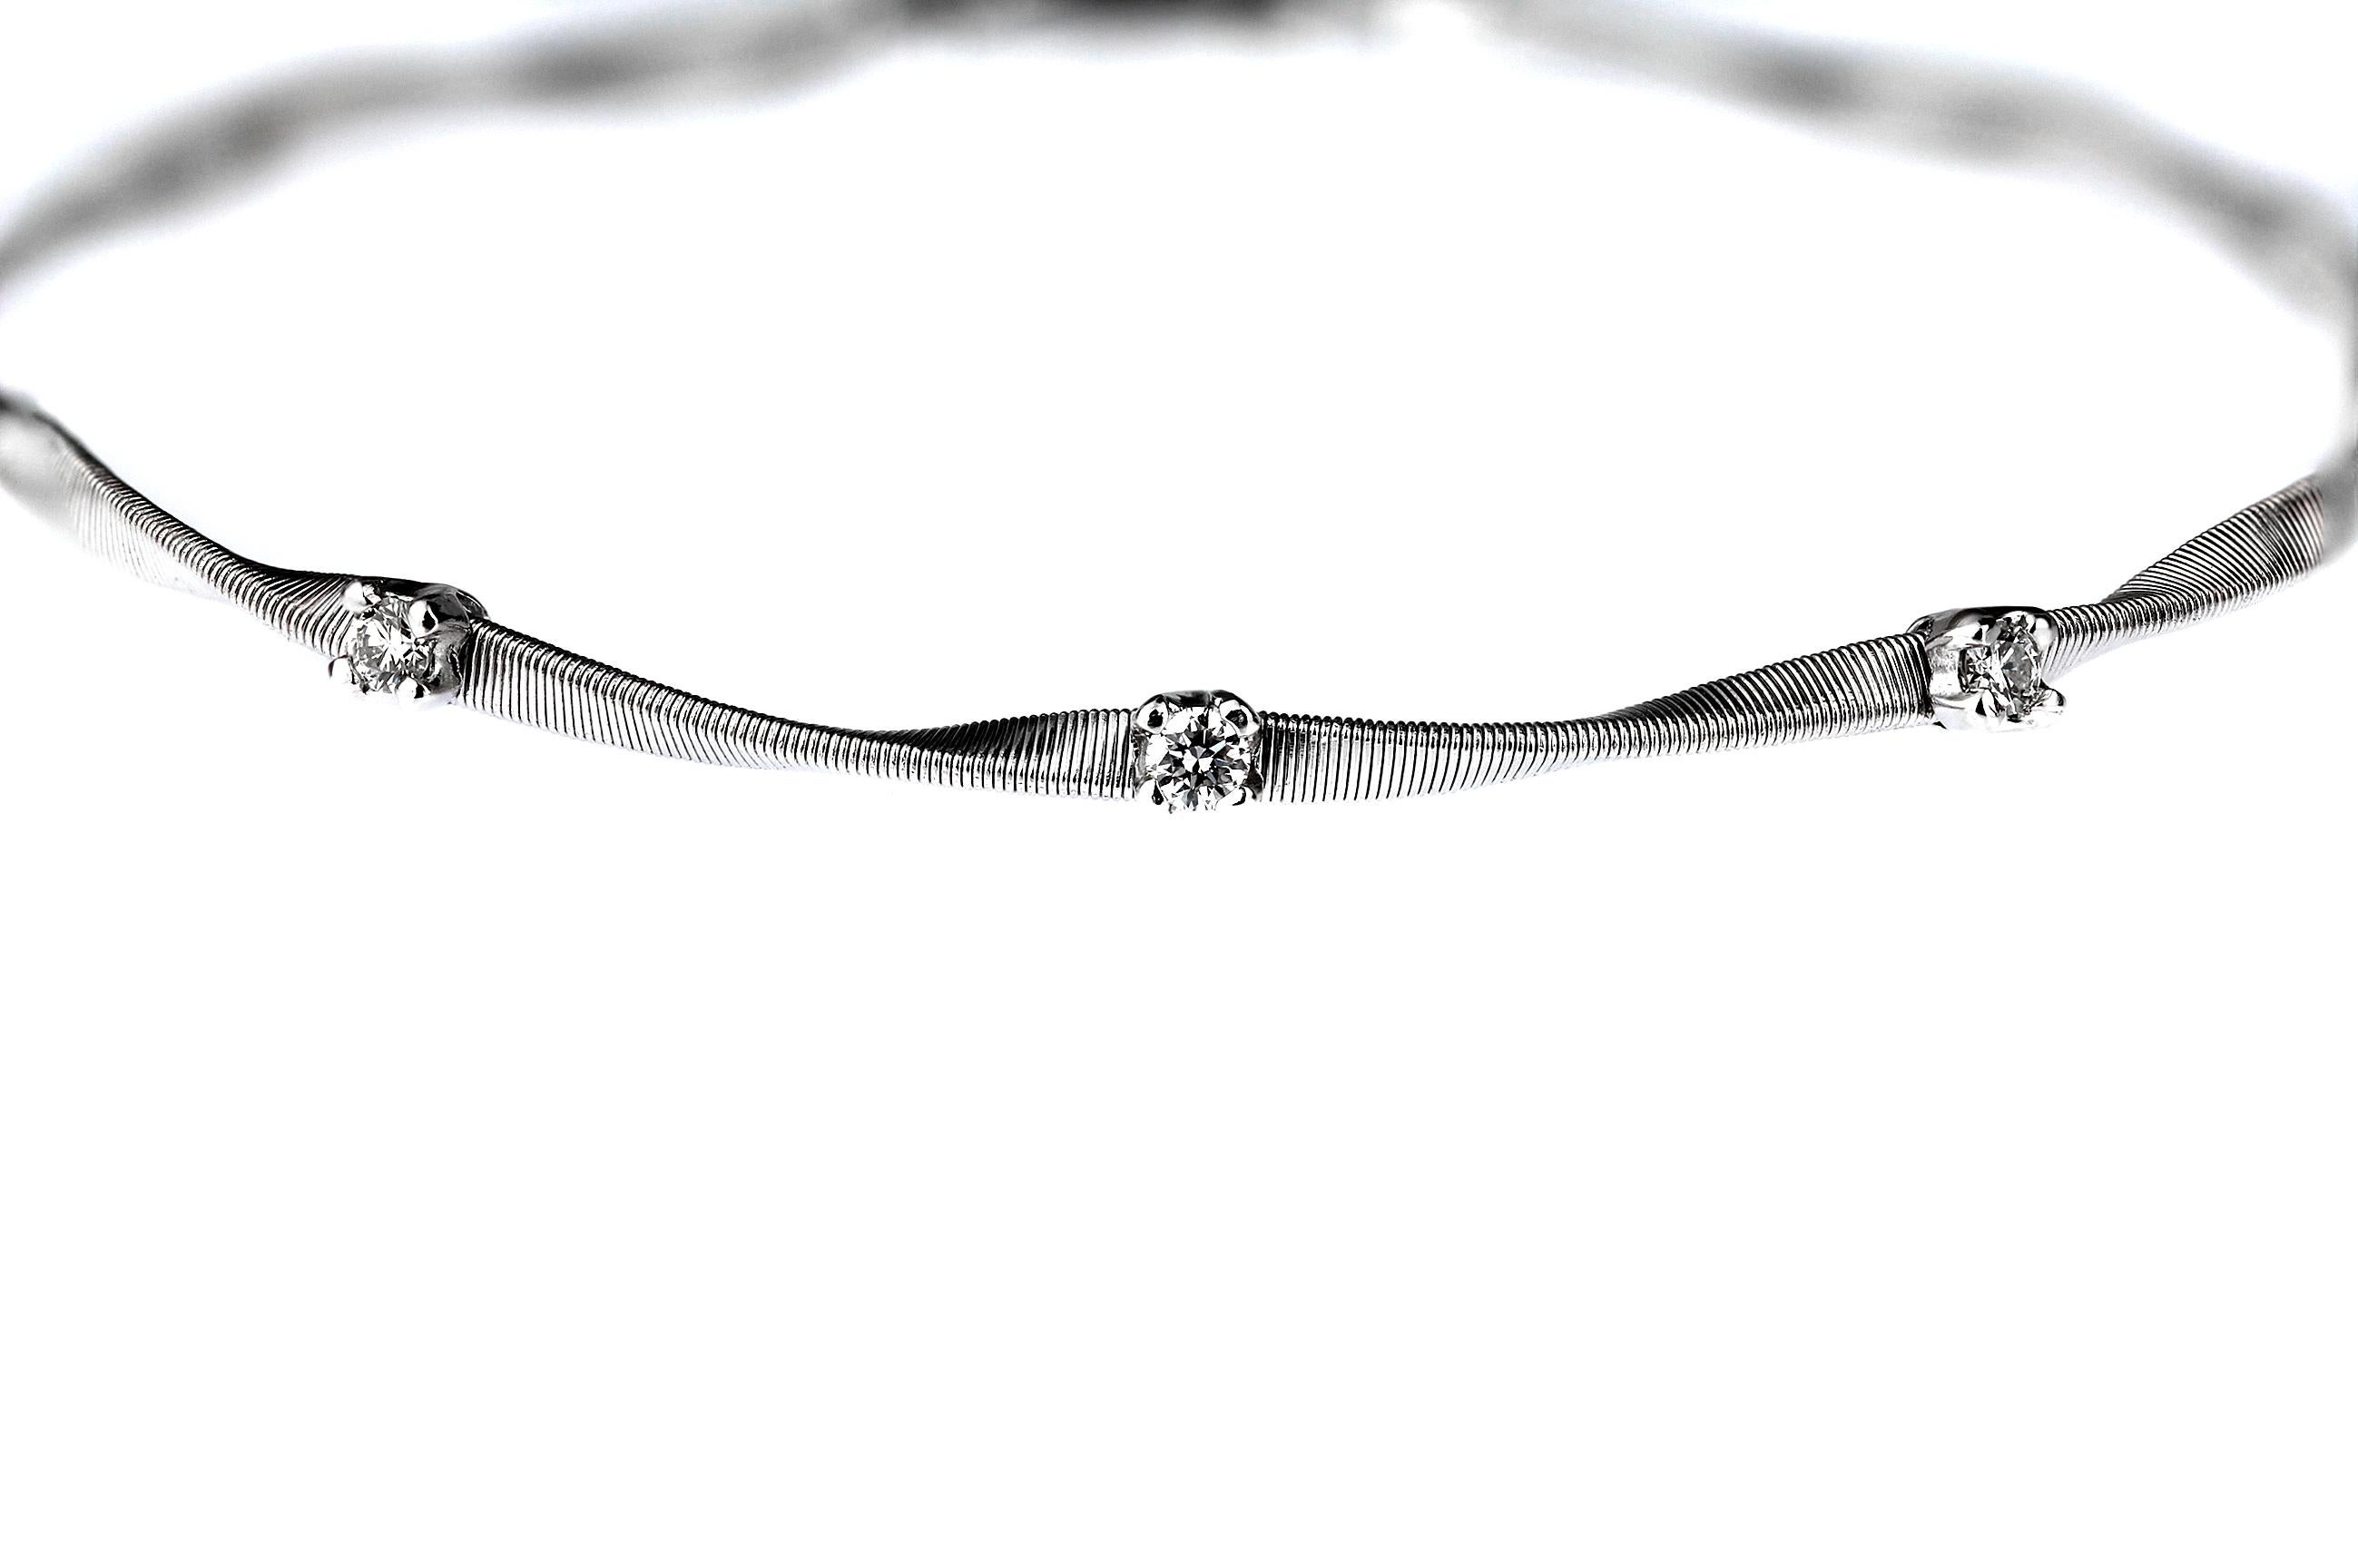 Marco Bicego “Marrakech” collection diamond-set stackable bangle/bracelet in 18 carat white gold.  This bracelet is set with round brilliant-cut diamonds. The texture of the bracelet is formed from hand-hammered and hand-twisted strands of gold